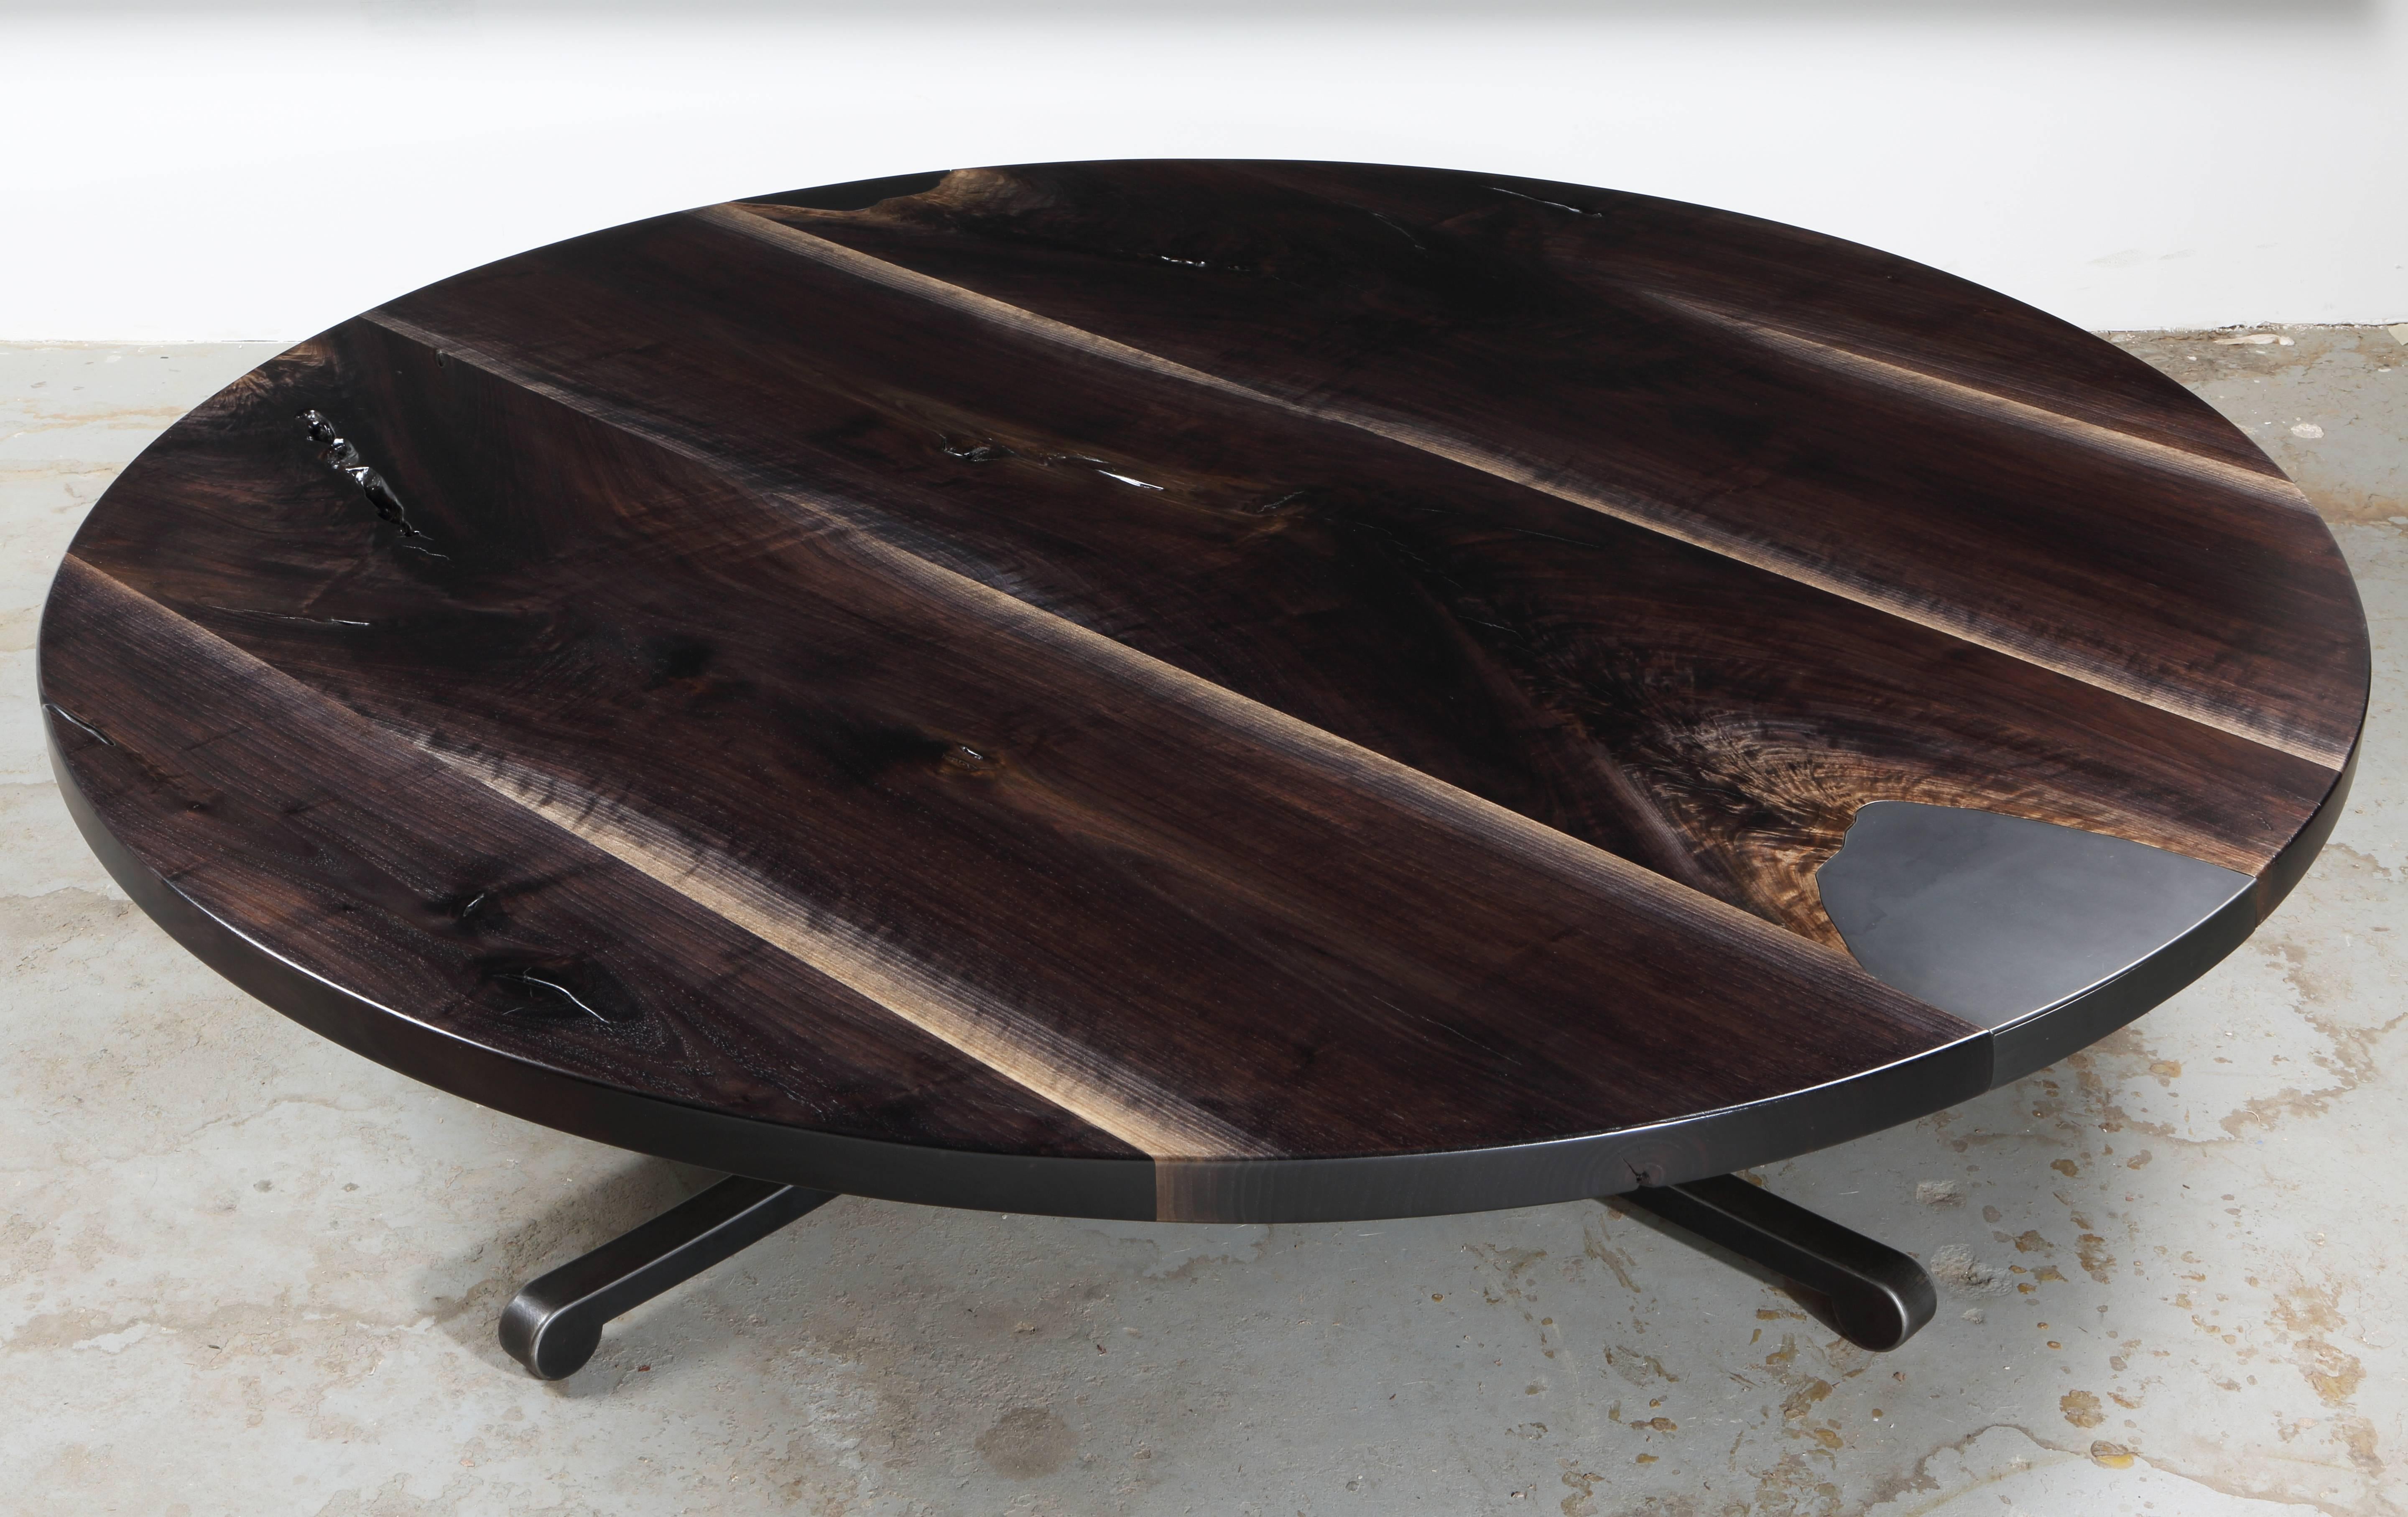 Alternating grain patterns of oxidized figure walnut lend a celestial effect to the top of the Serif coffee table. Grain matched steel inlays, with removable steel plate revealing hidden storage. Signature Serif leg, shown in raw flame cut finish.